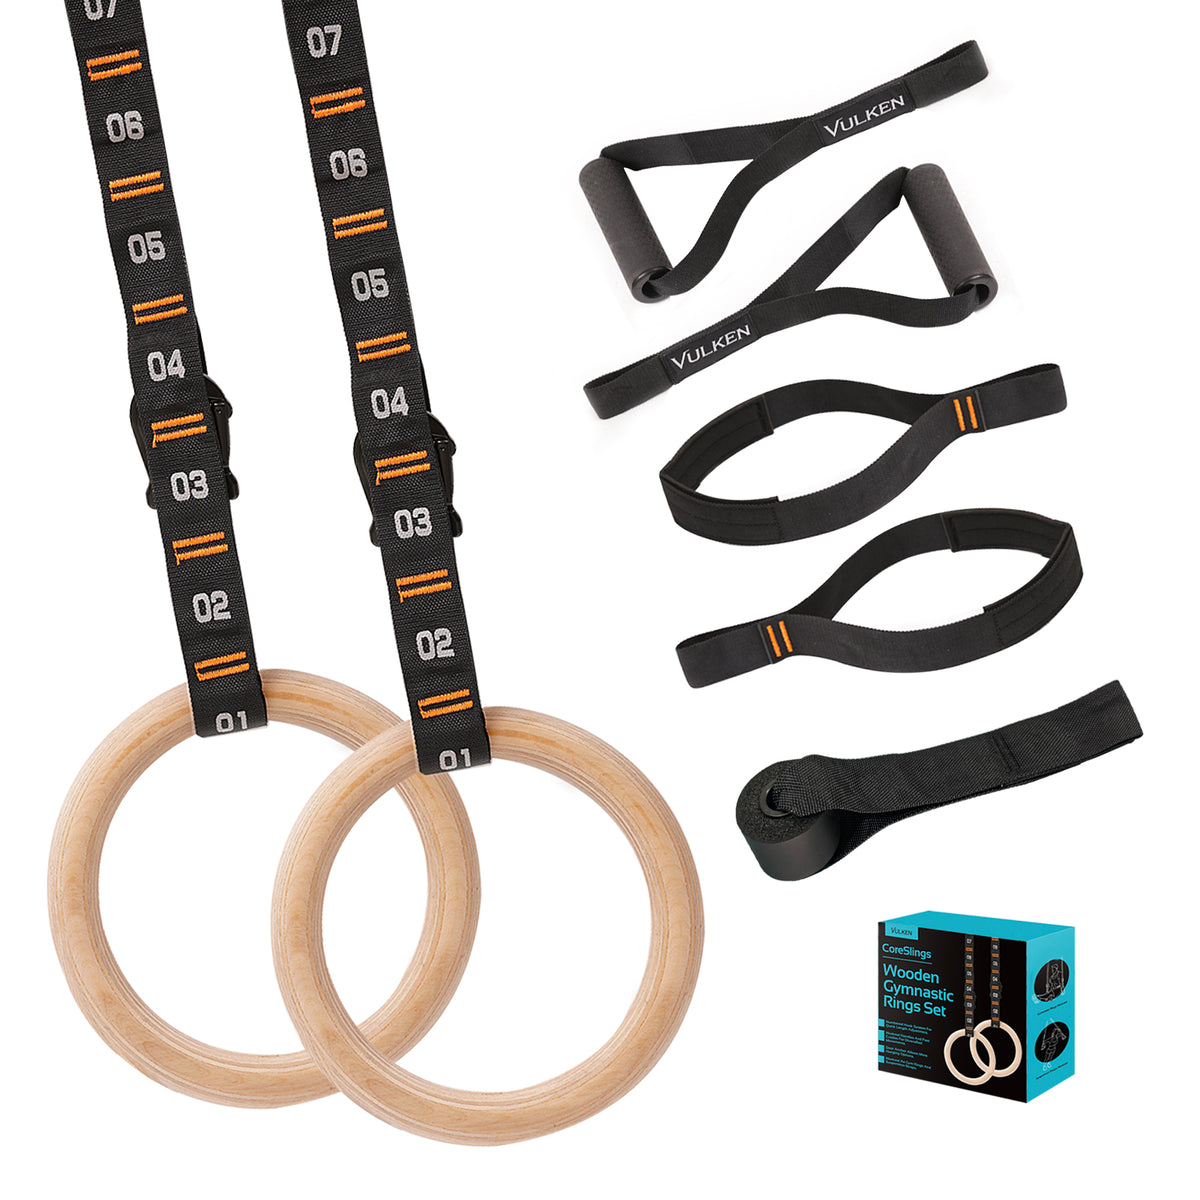 Olympic Gym Rings with Adjustable Straps 5BILLION FITNESS Wood Gymnastic Rings Train Workout Pull Ups and Dips Heavy Duty Gym Equipment for Home Gym Strength Training 